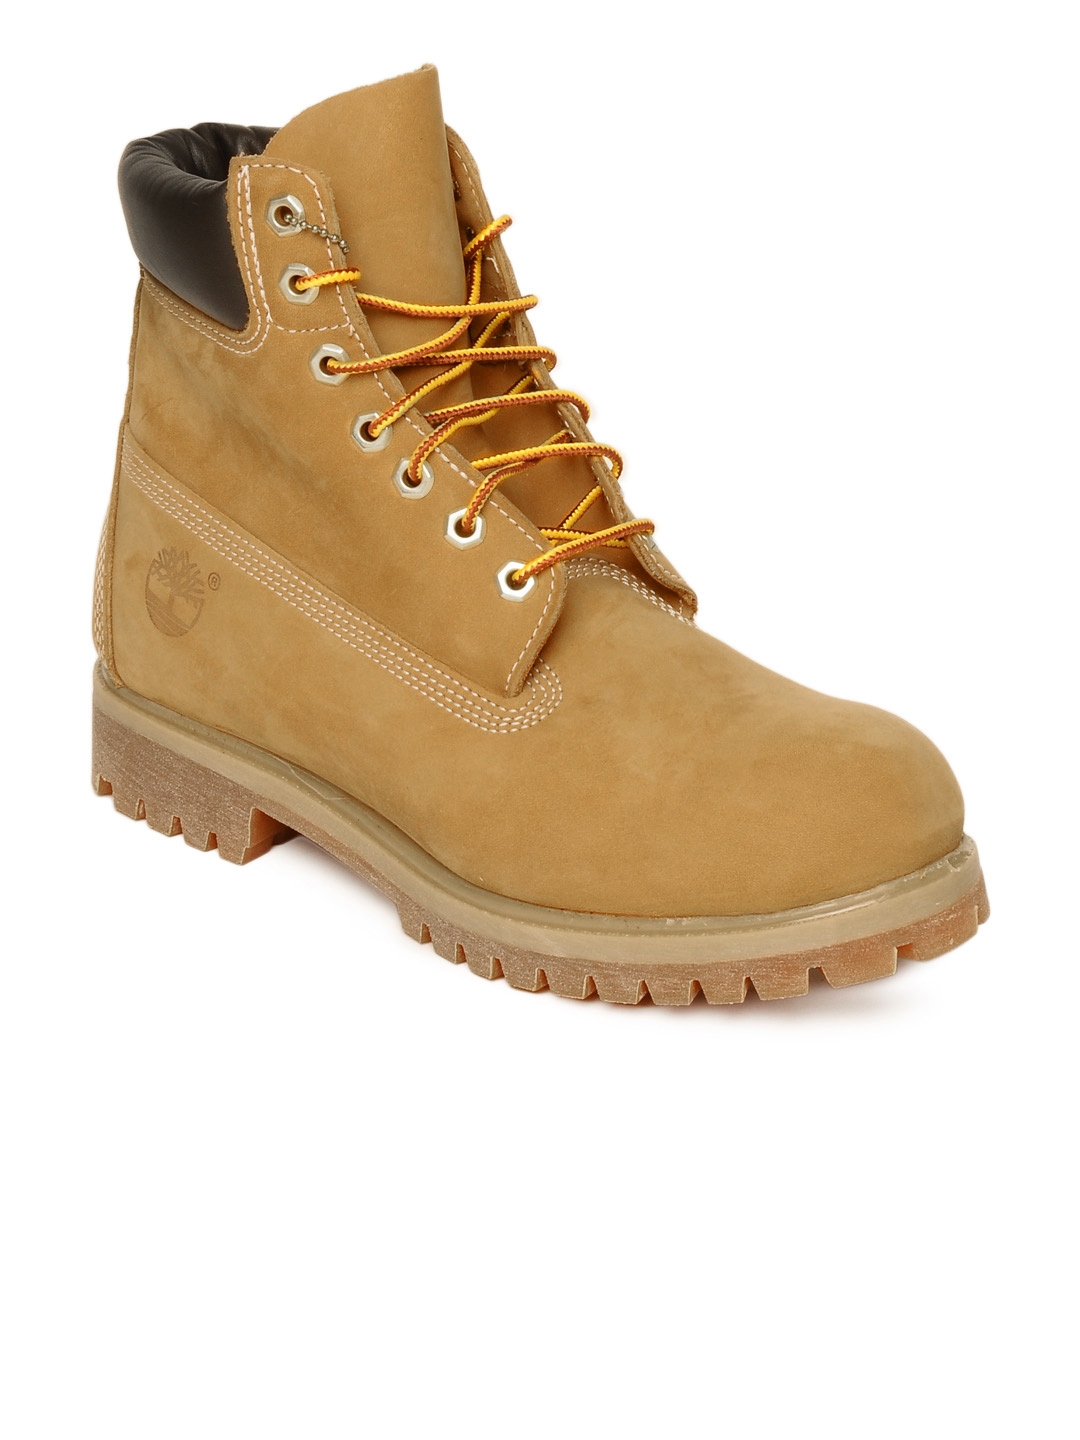 Buy Timberland Men 6 Inch Premium Boots Boots for | Myntra